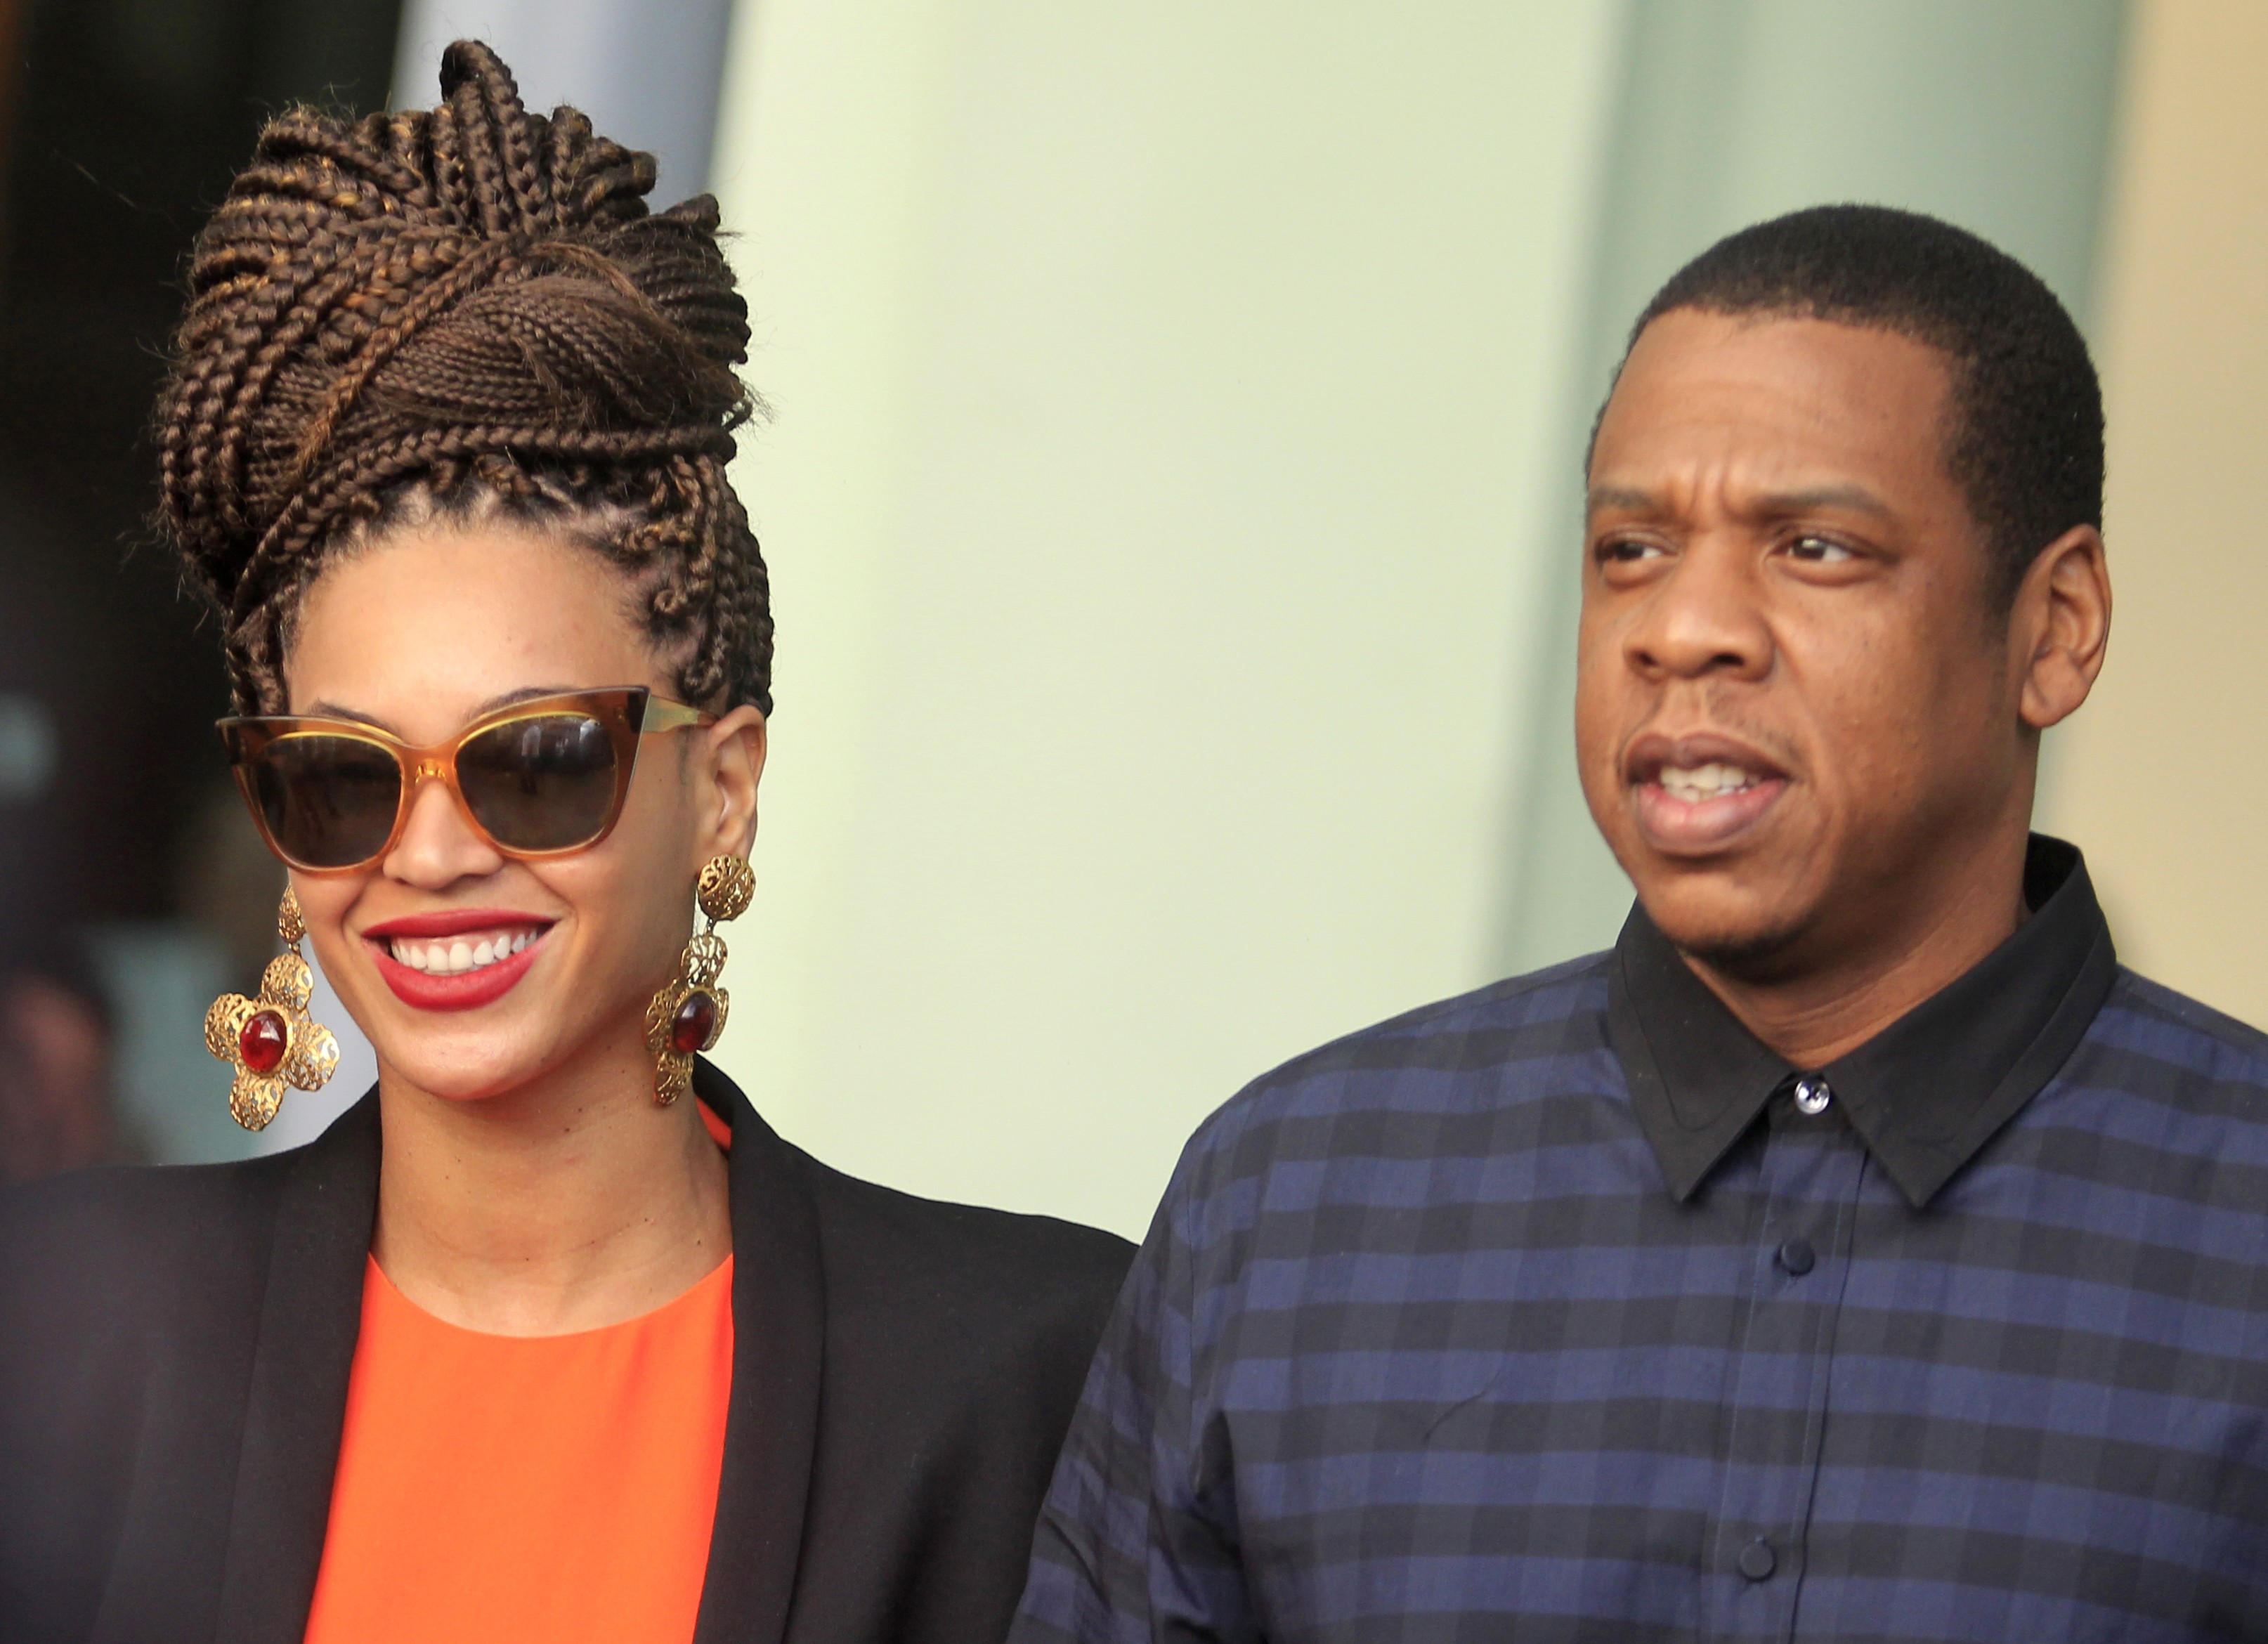 U.S. singer Beyonce and her husband rapper Jay-Z walk as they leave their hotel in Havana on April 4, 2013. (Enrique De La Osa—Reuters/Corbis)